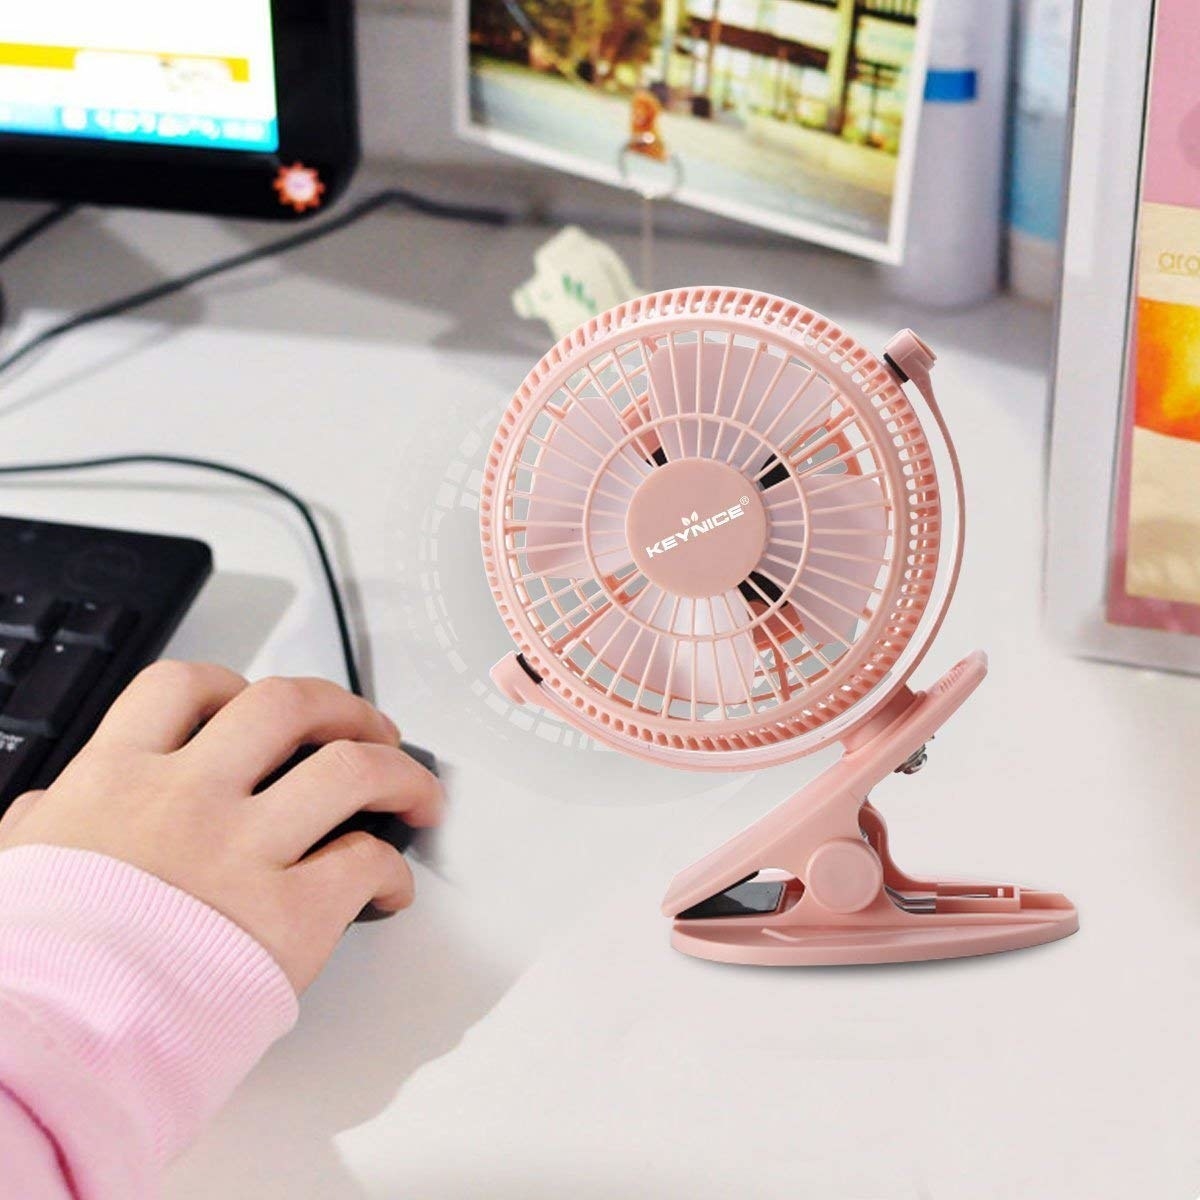 These 10 weird (but brilliant) gadgets will make your life easier